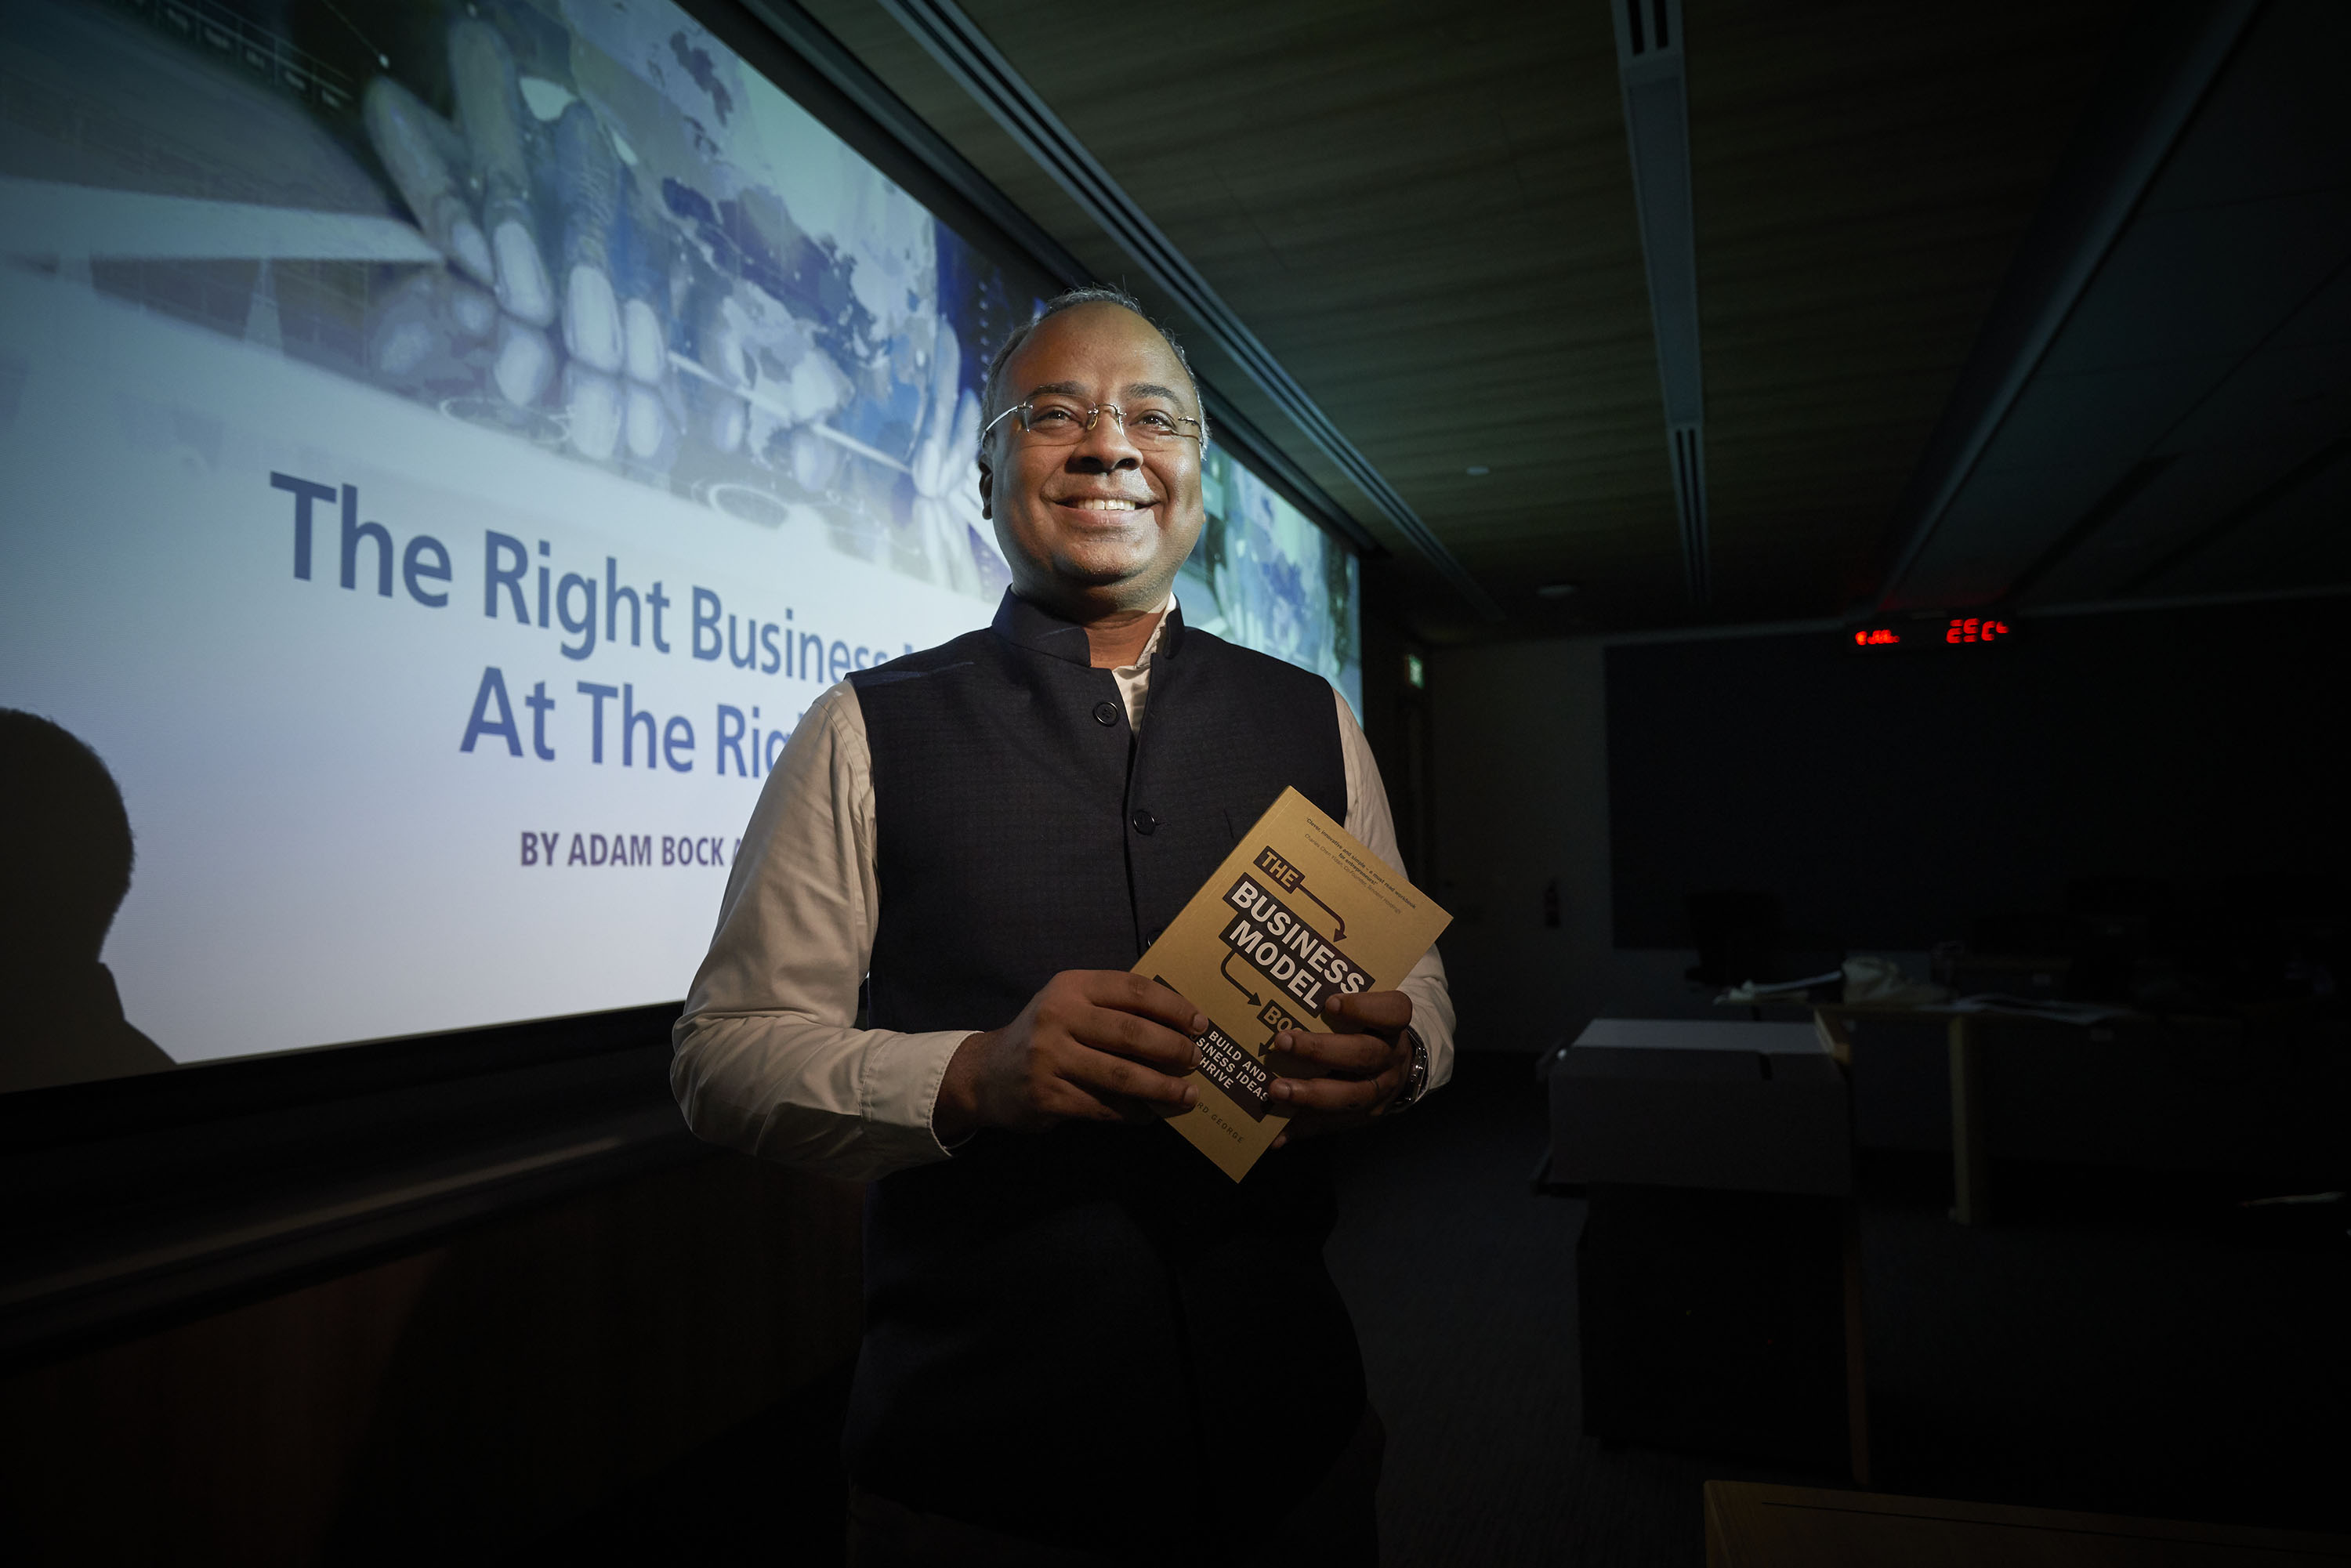 Dean’s new role: Bringing research mainstream and helping entrepreneurs